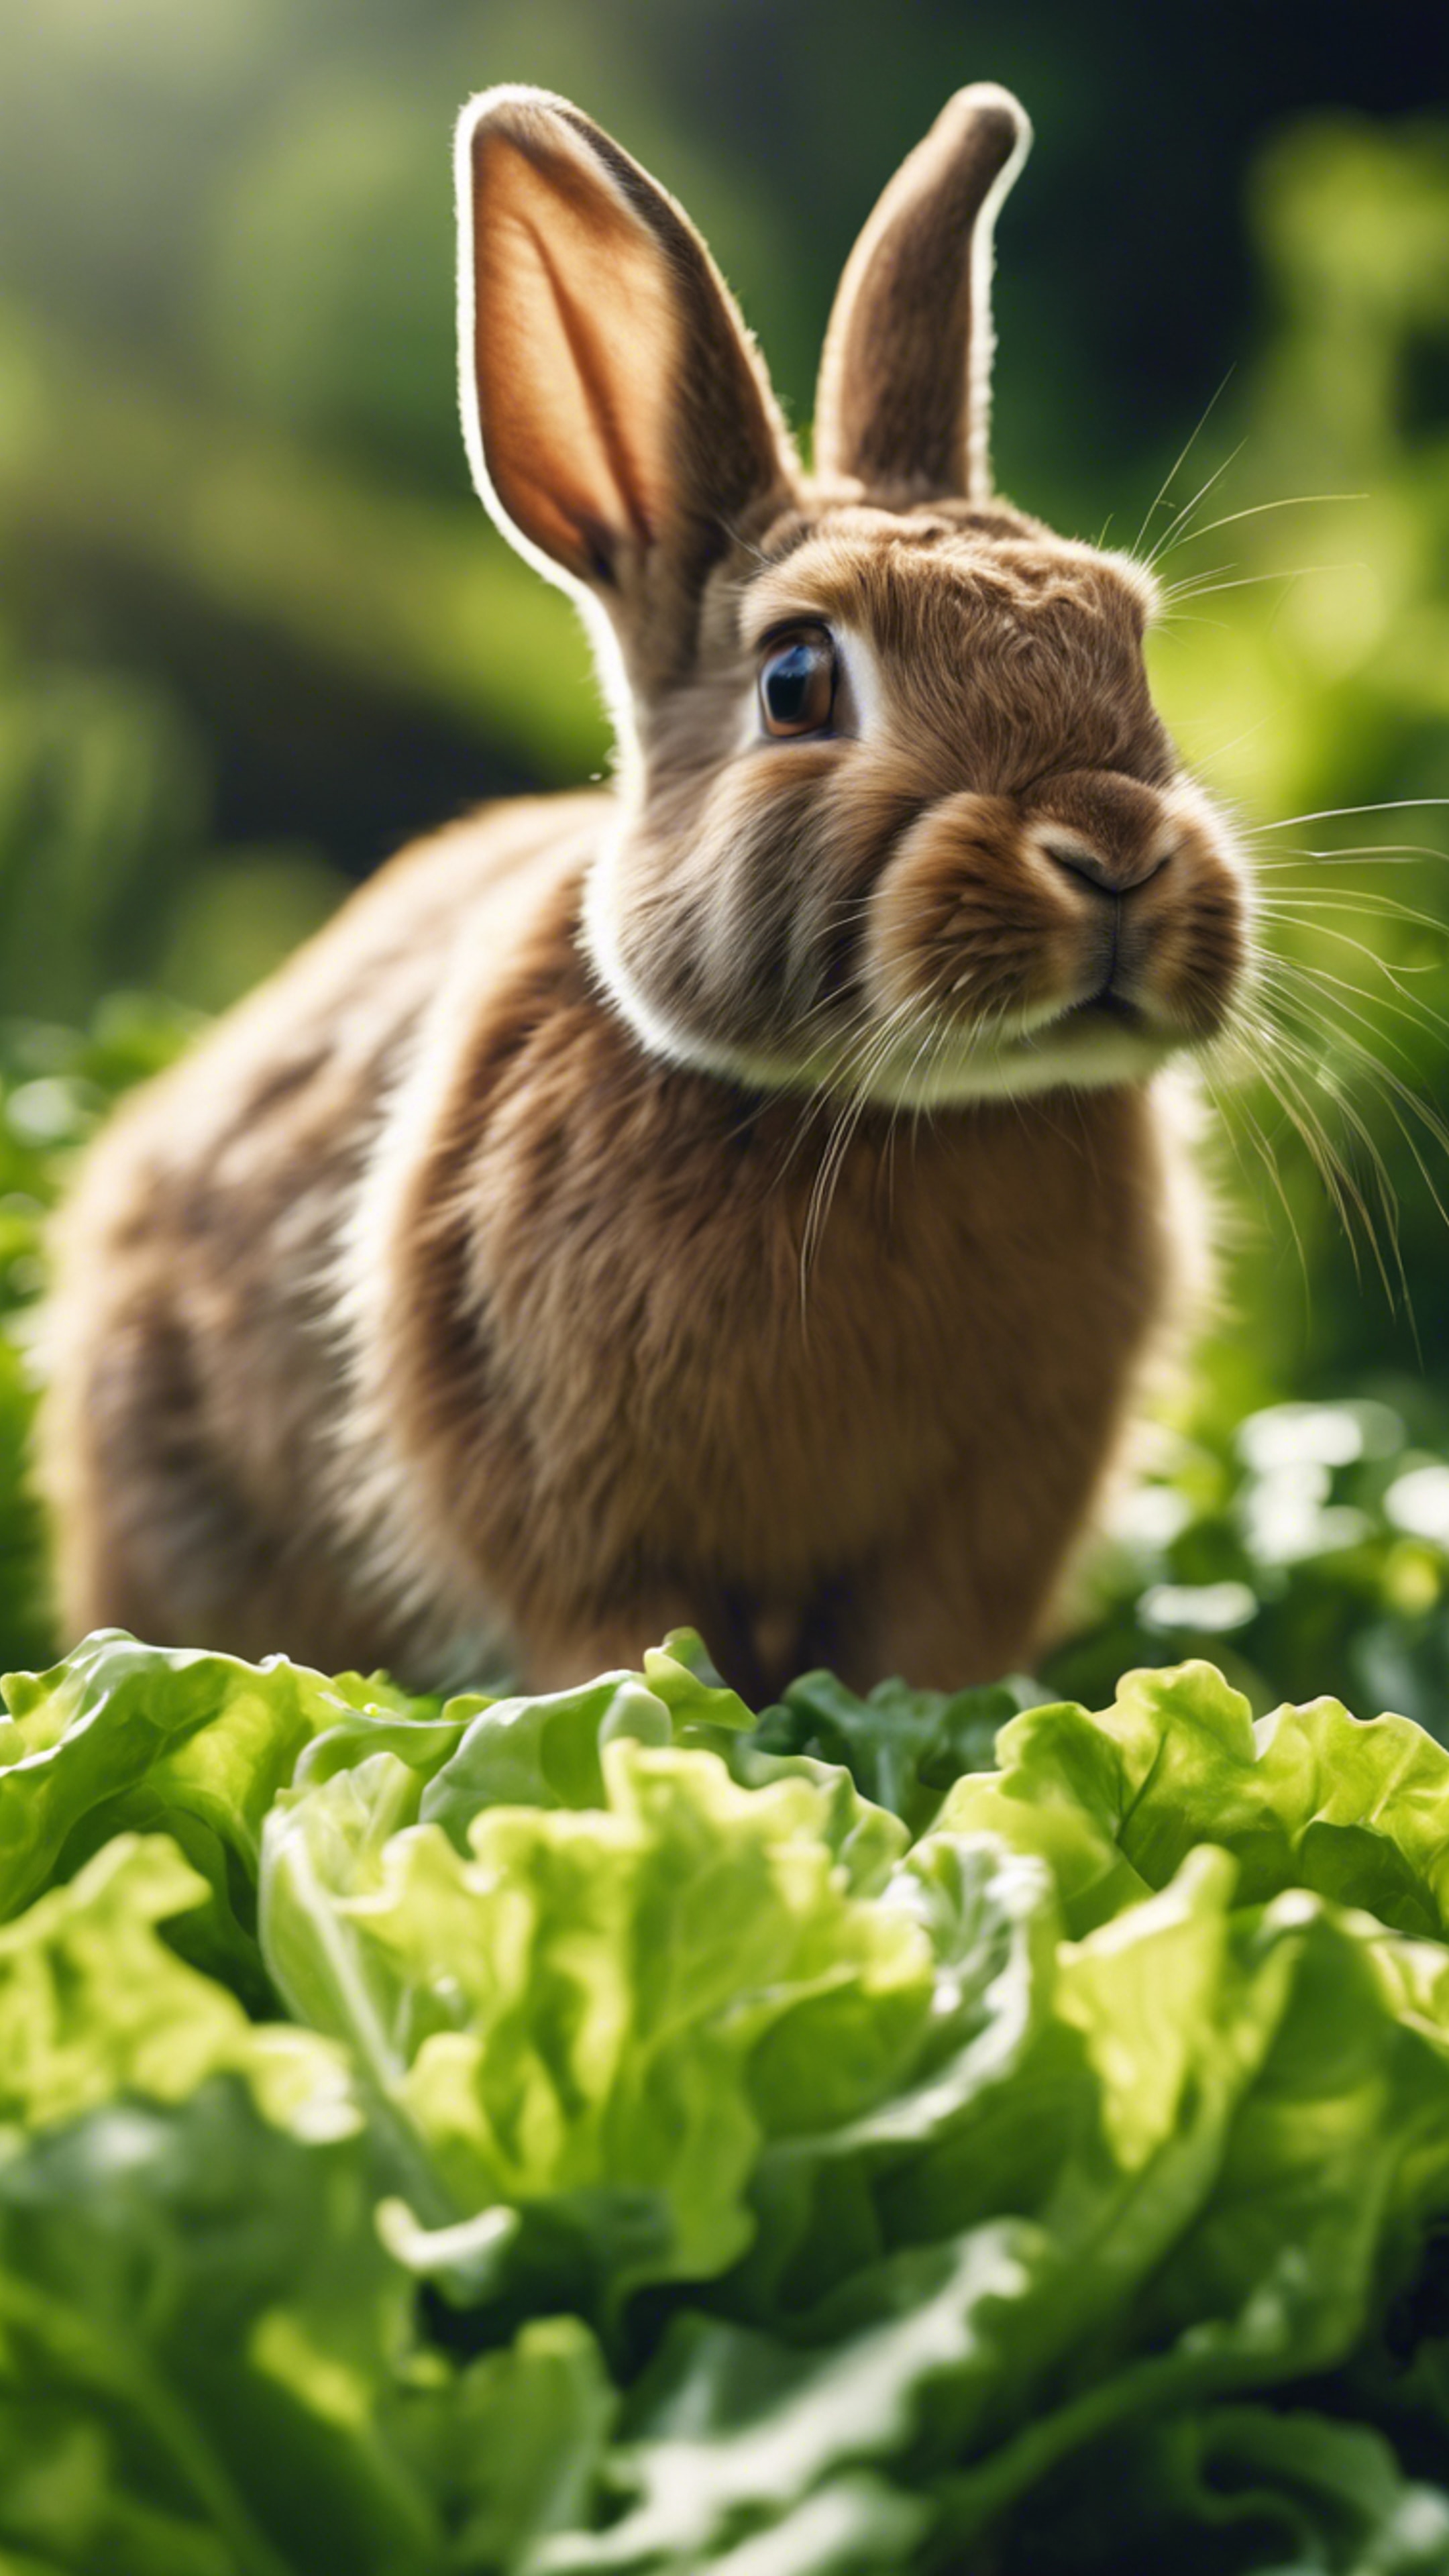 A cute brown rabbit nibbling on fresh green lettuce in a sunlit garden. Валлпапер[0f4f15256a1c40a6b3ba]